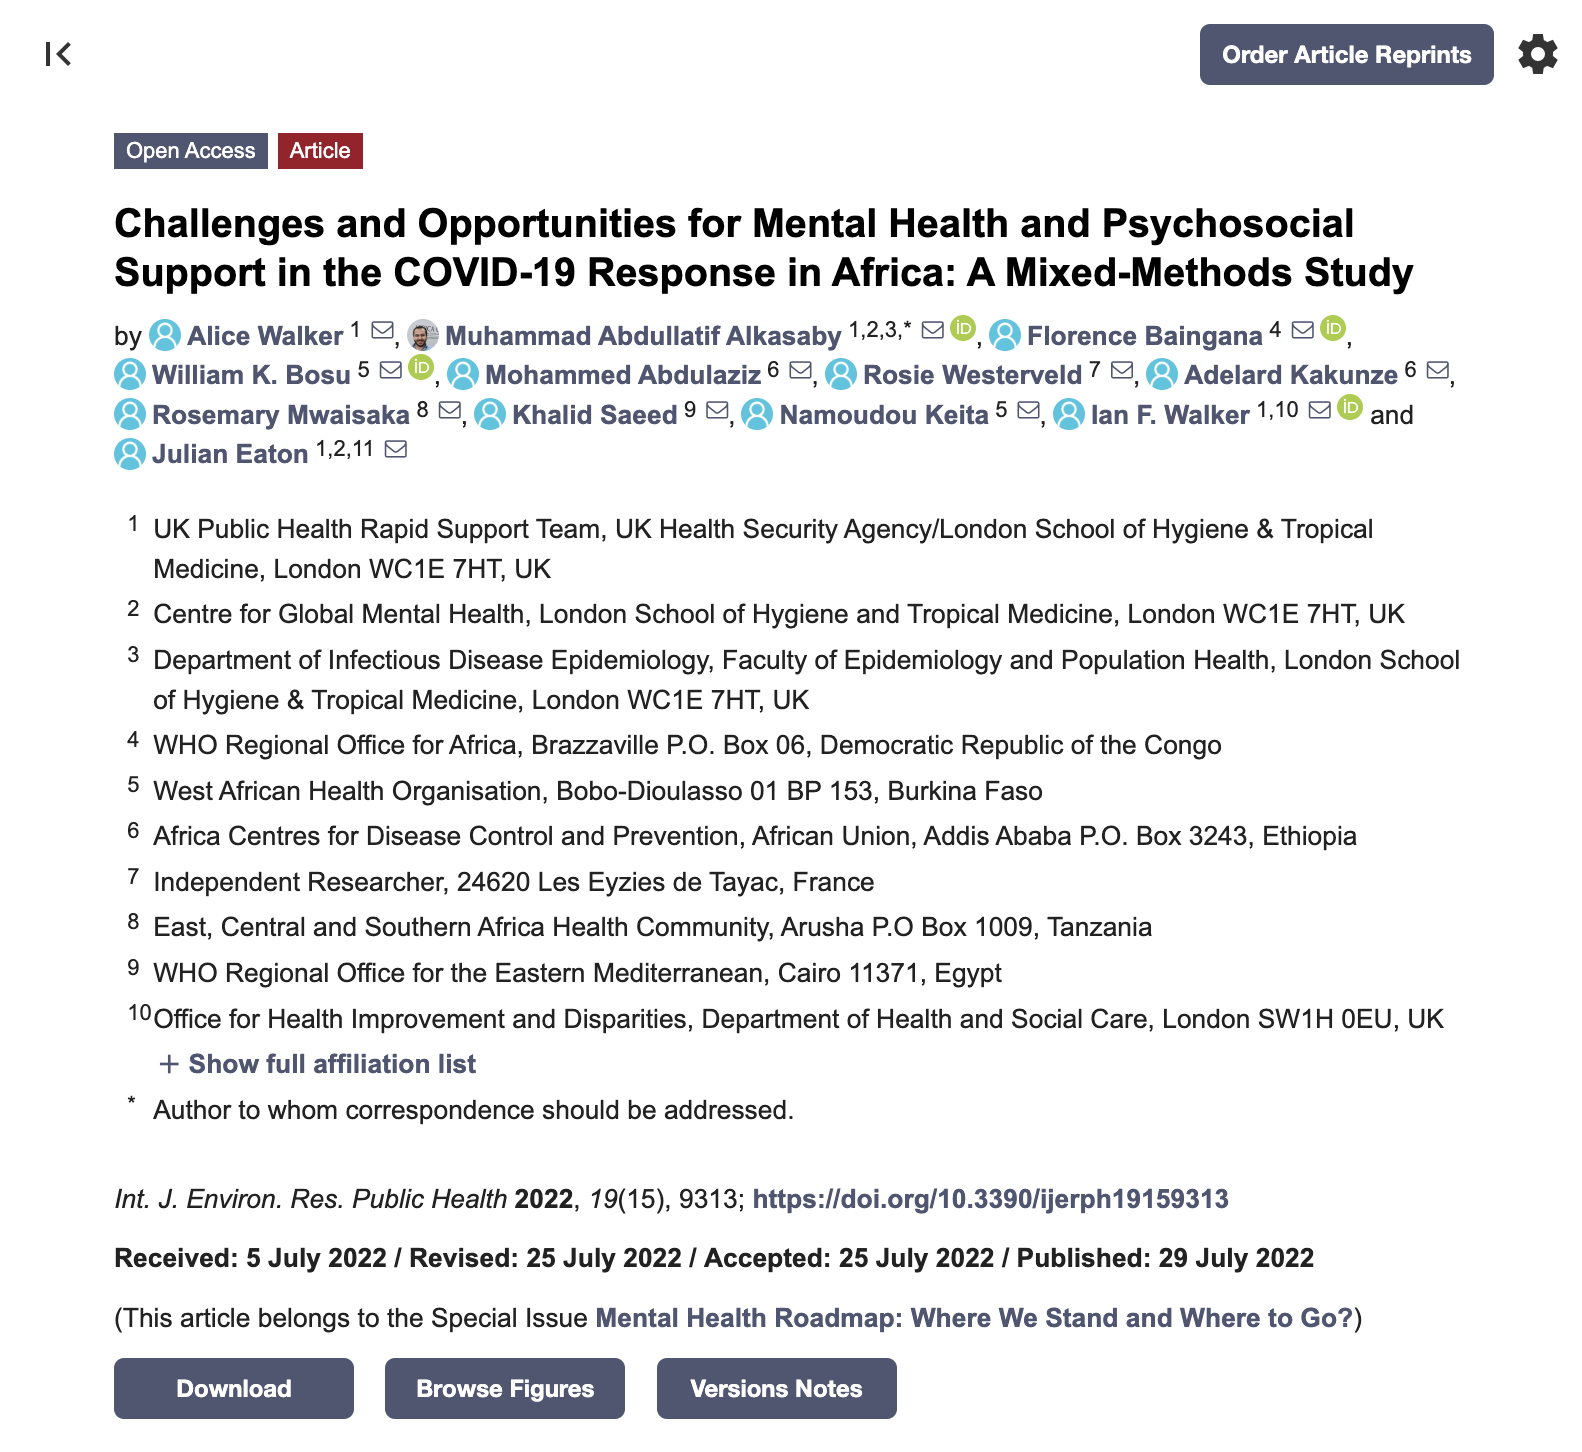 Challenges and Opportunities for Mental Health and Psychosocial Support in the COVID-19 Response in Africa: A Mixed-Methods Study.